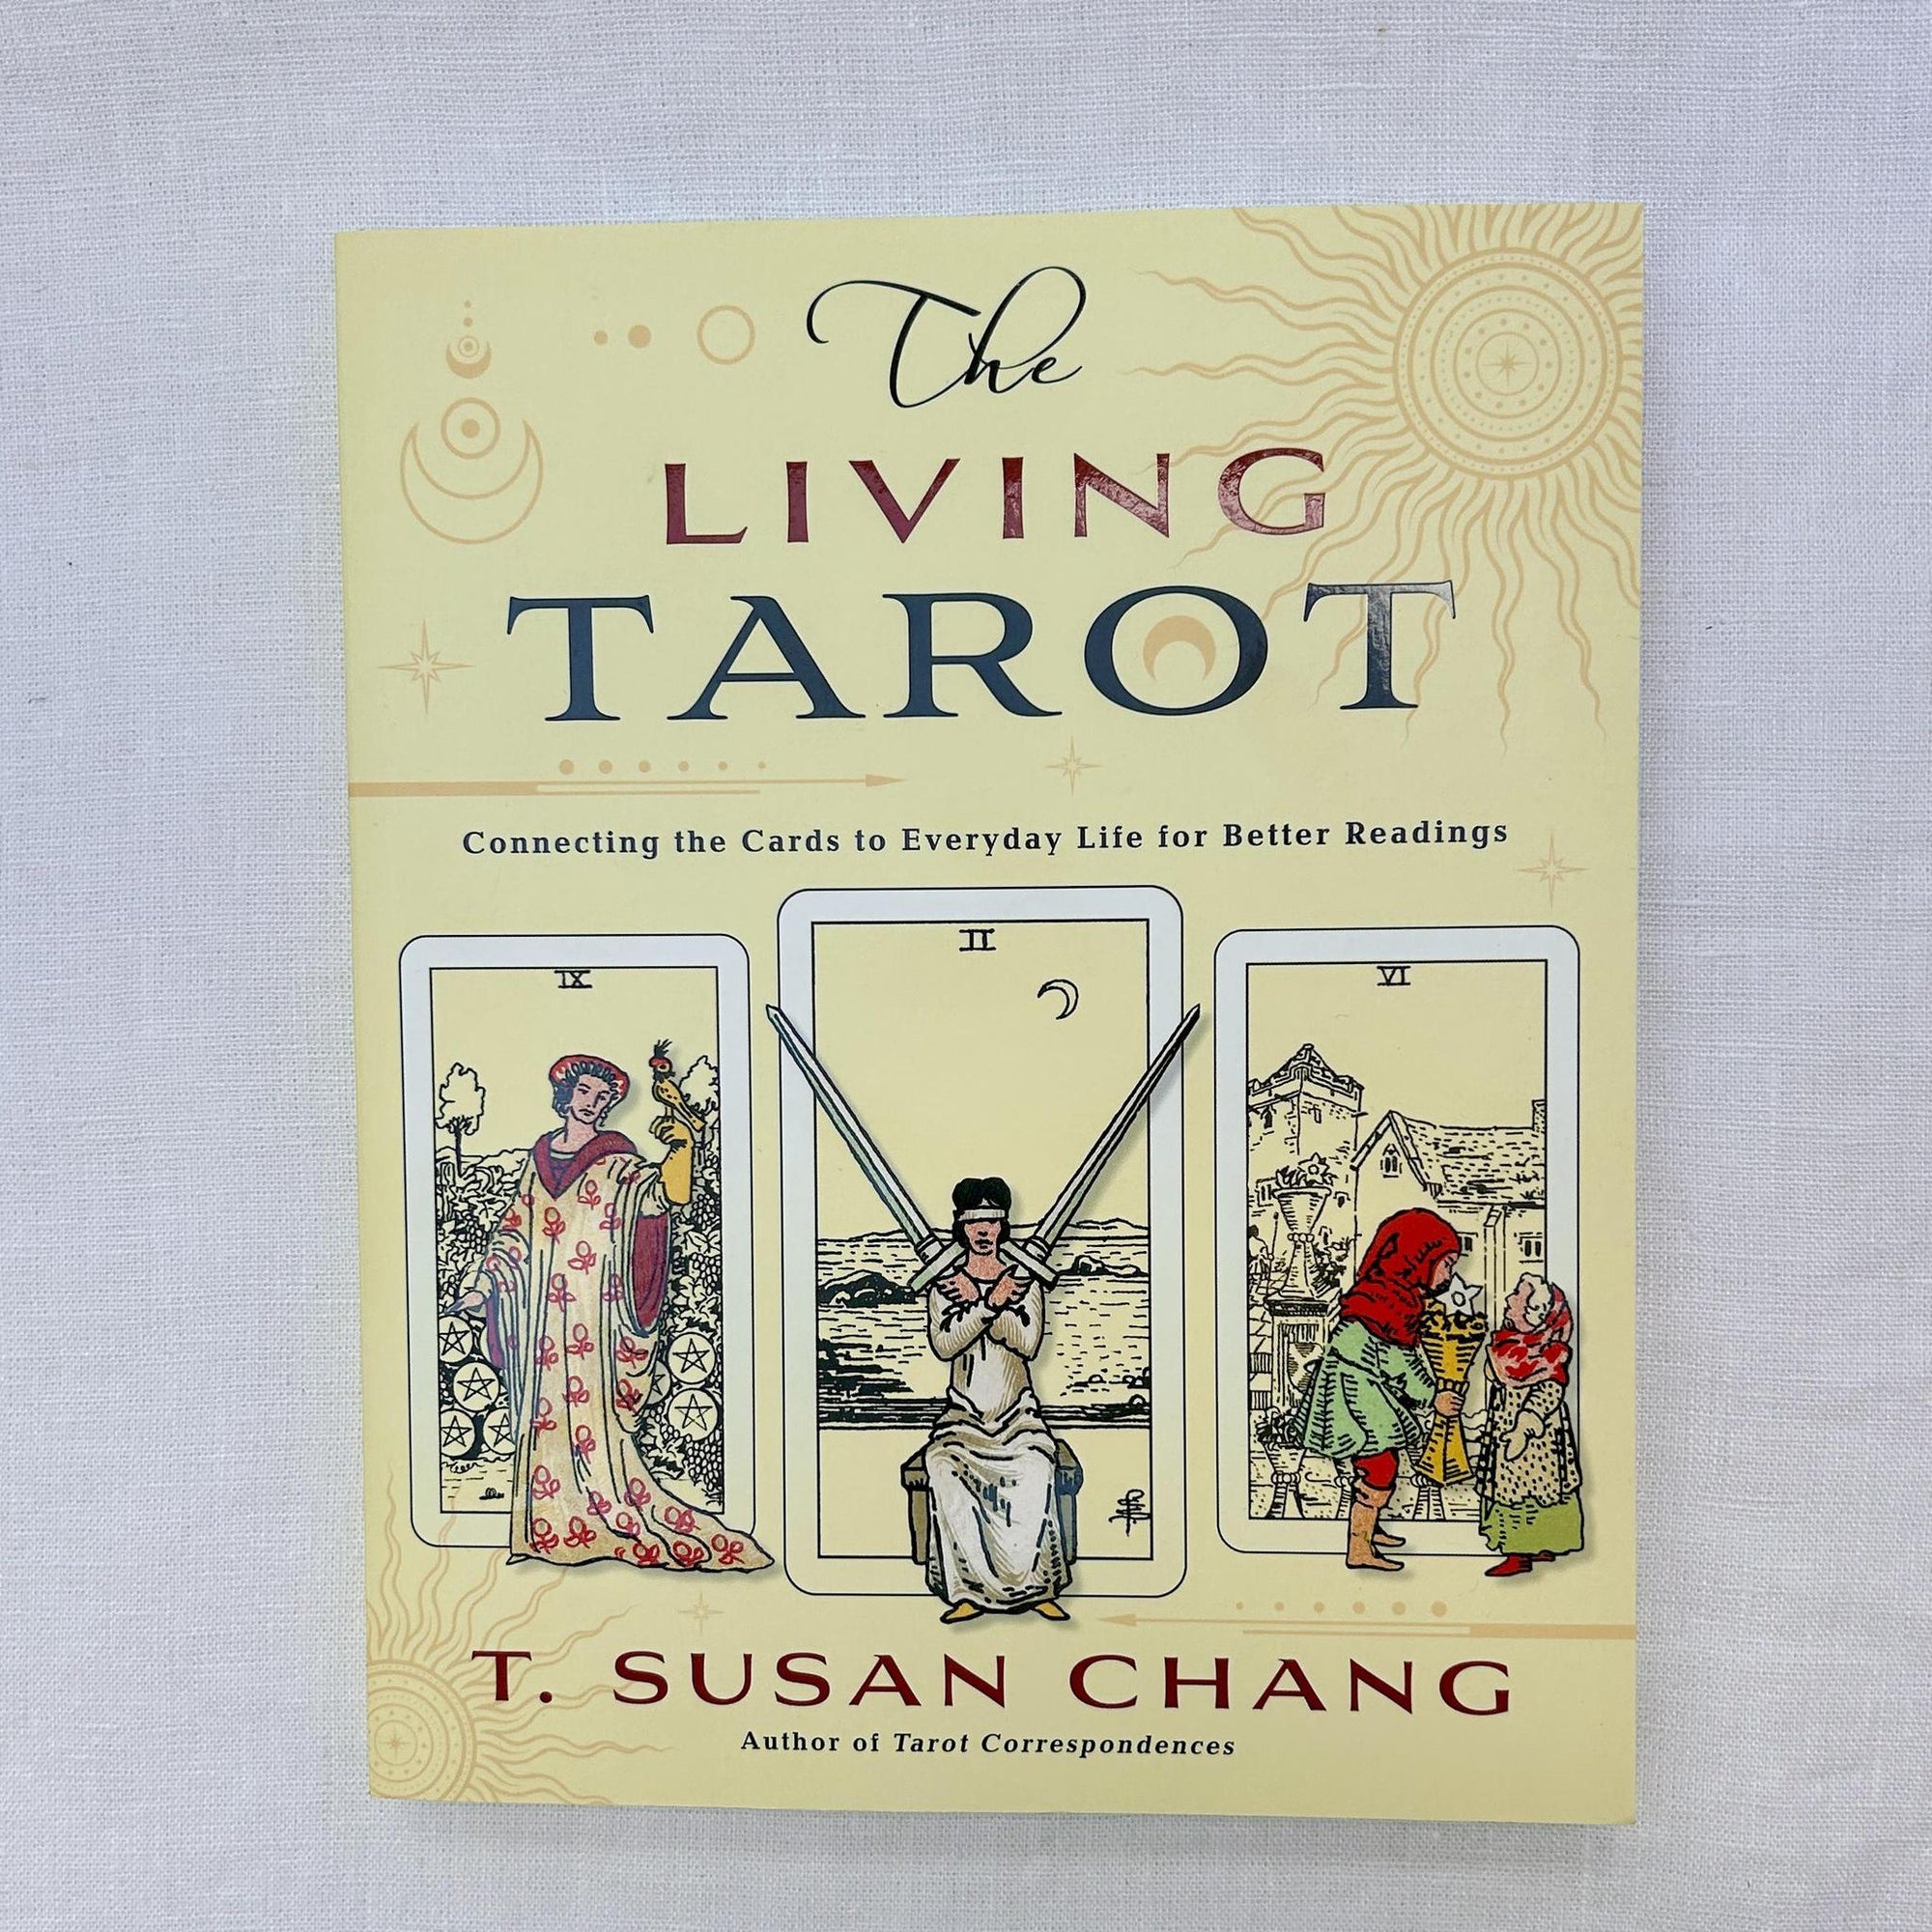 The Living Tarot book: connecting the cards to everyday life for better readings